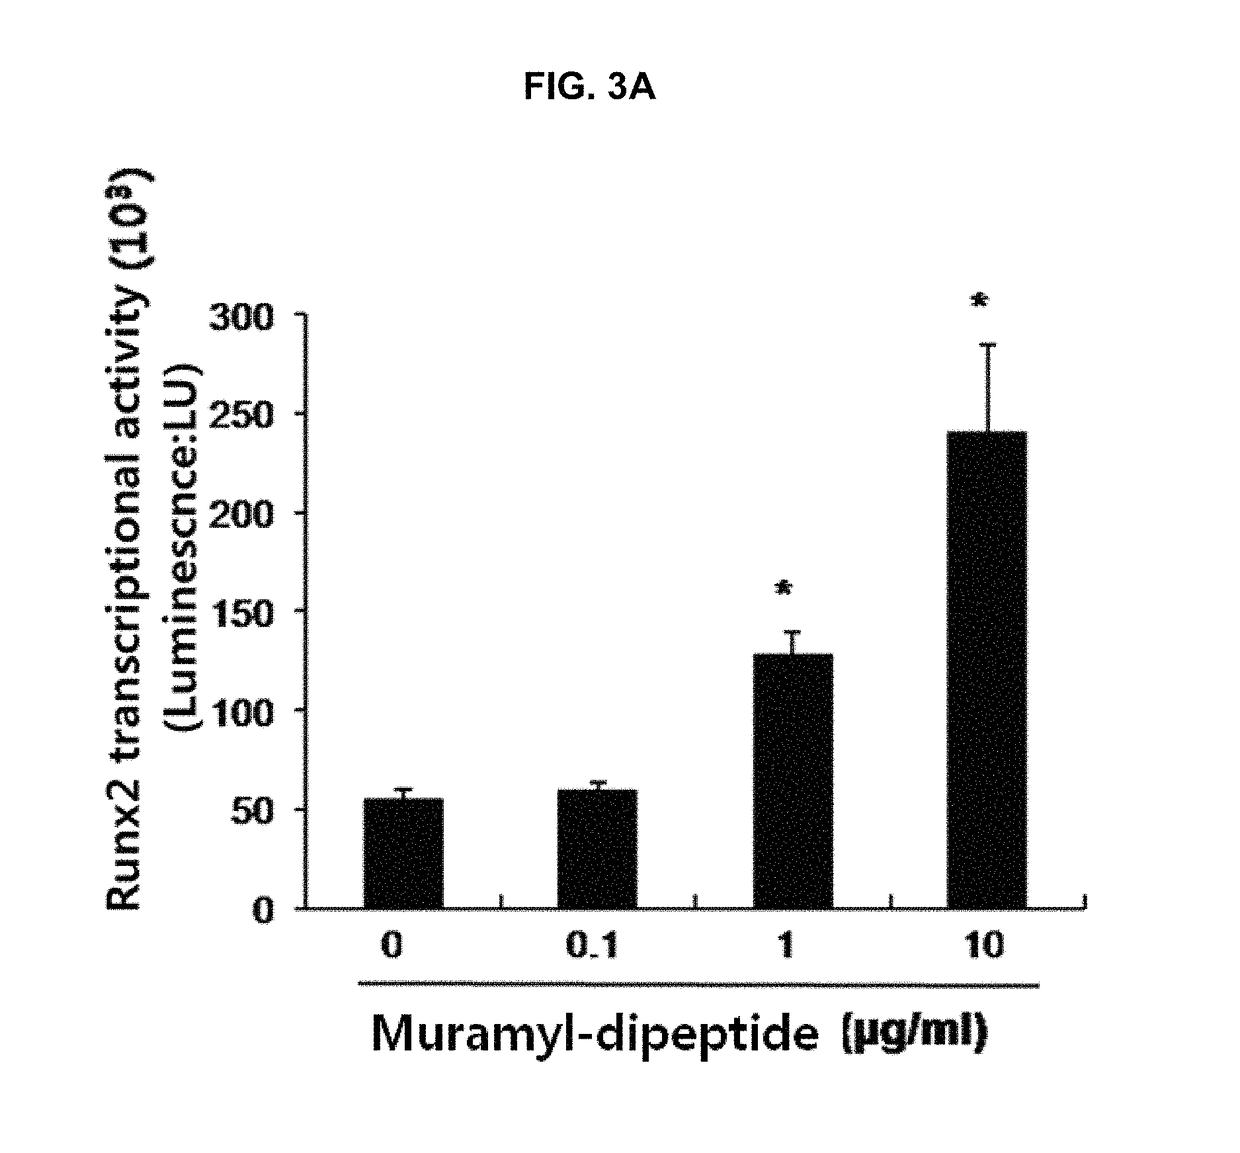 Bone loss preventing and bone regeneration or bone formation promoting pharmaceutical composition comprising muramyl dipeptide